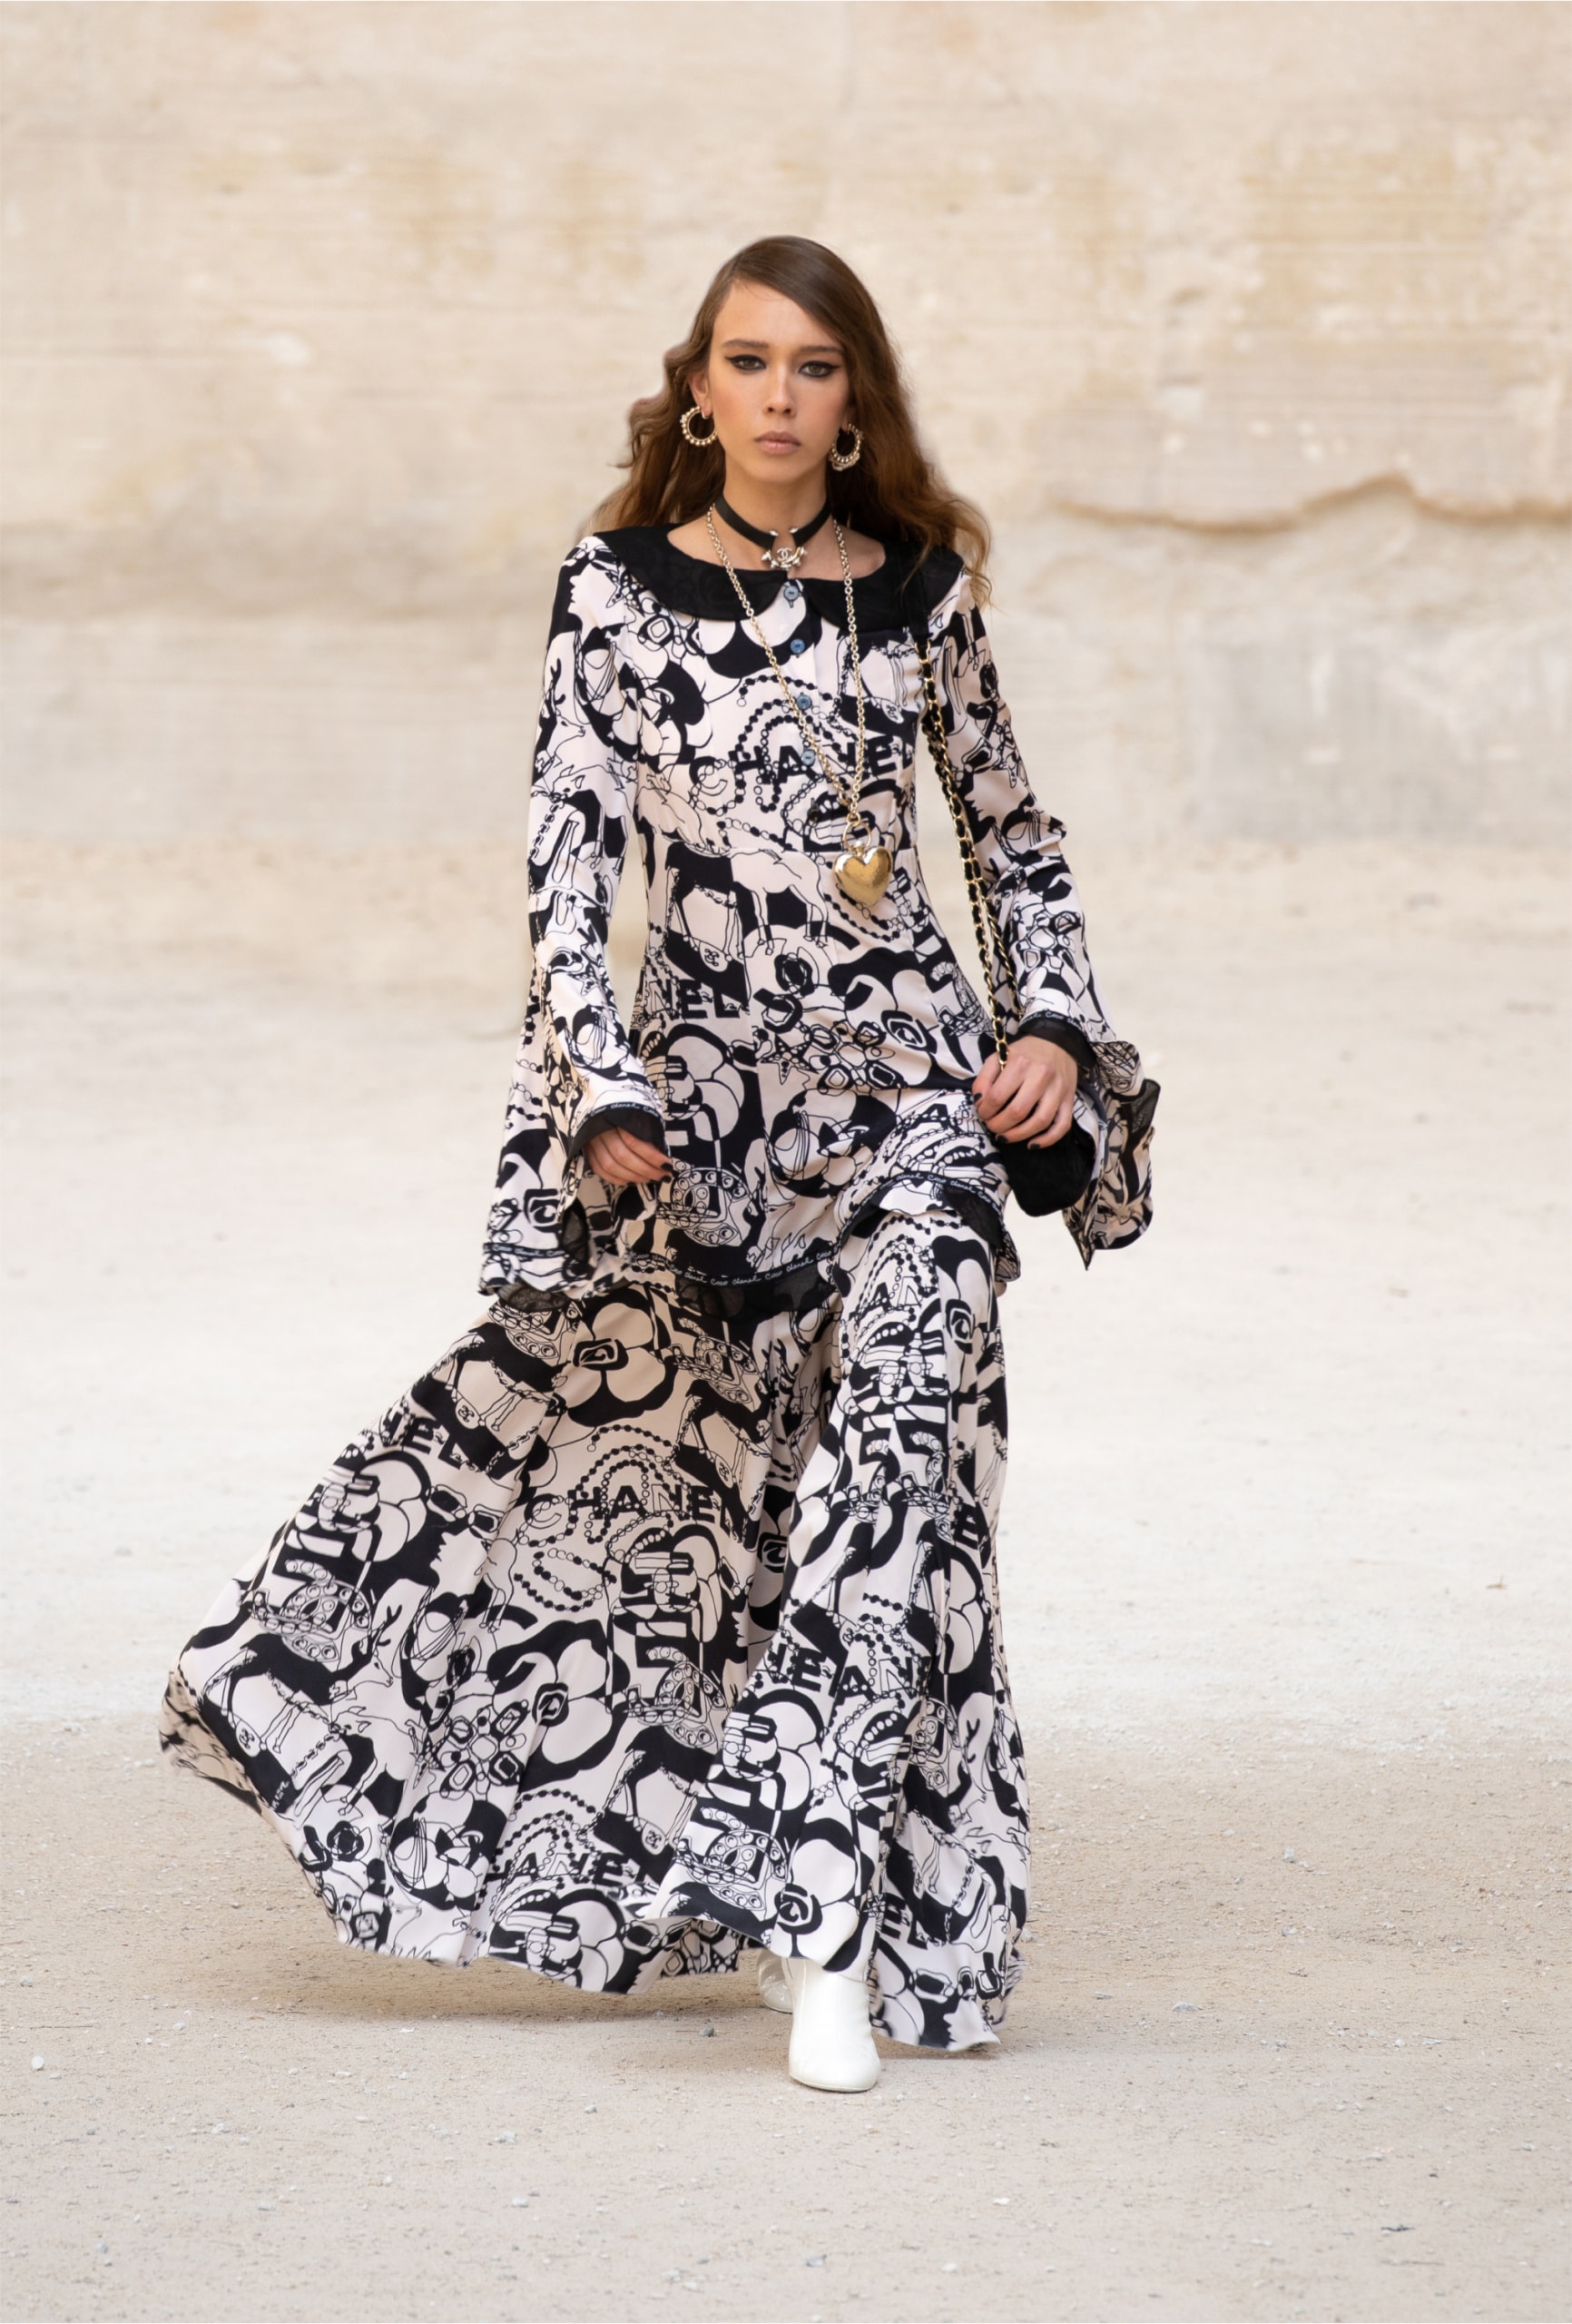 chanel cruise resort collection runway virginie viard provence punk rock jean cocteau tweed suits dresses 